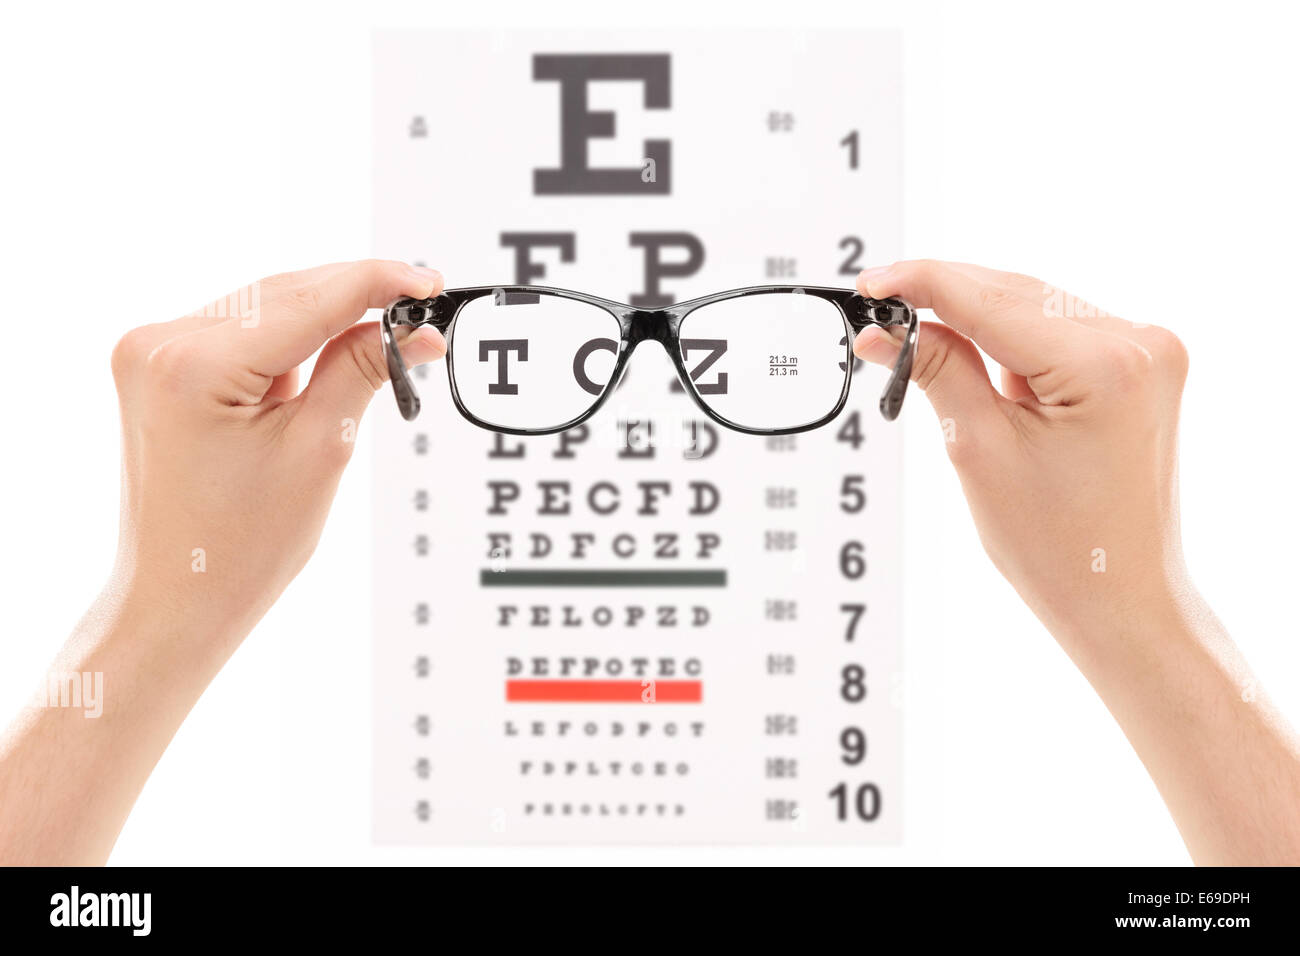 Hands holding glasses in front of an eye chart Stock Photo